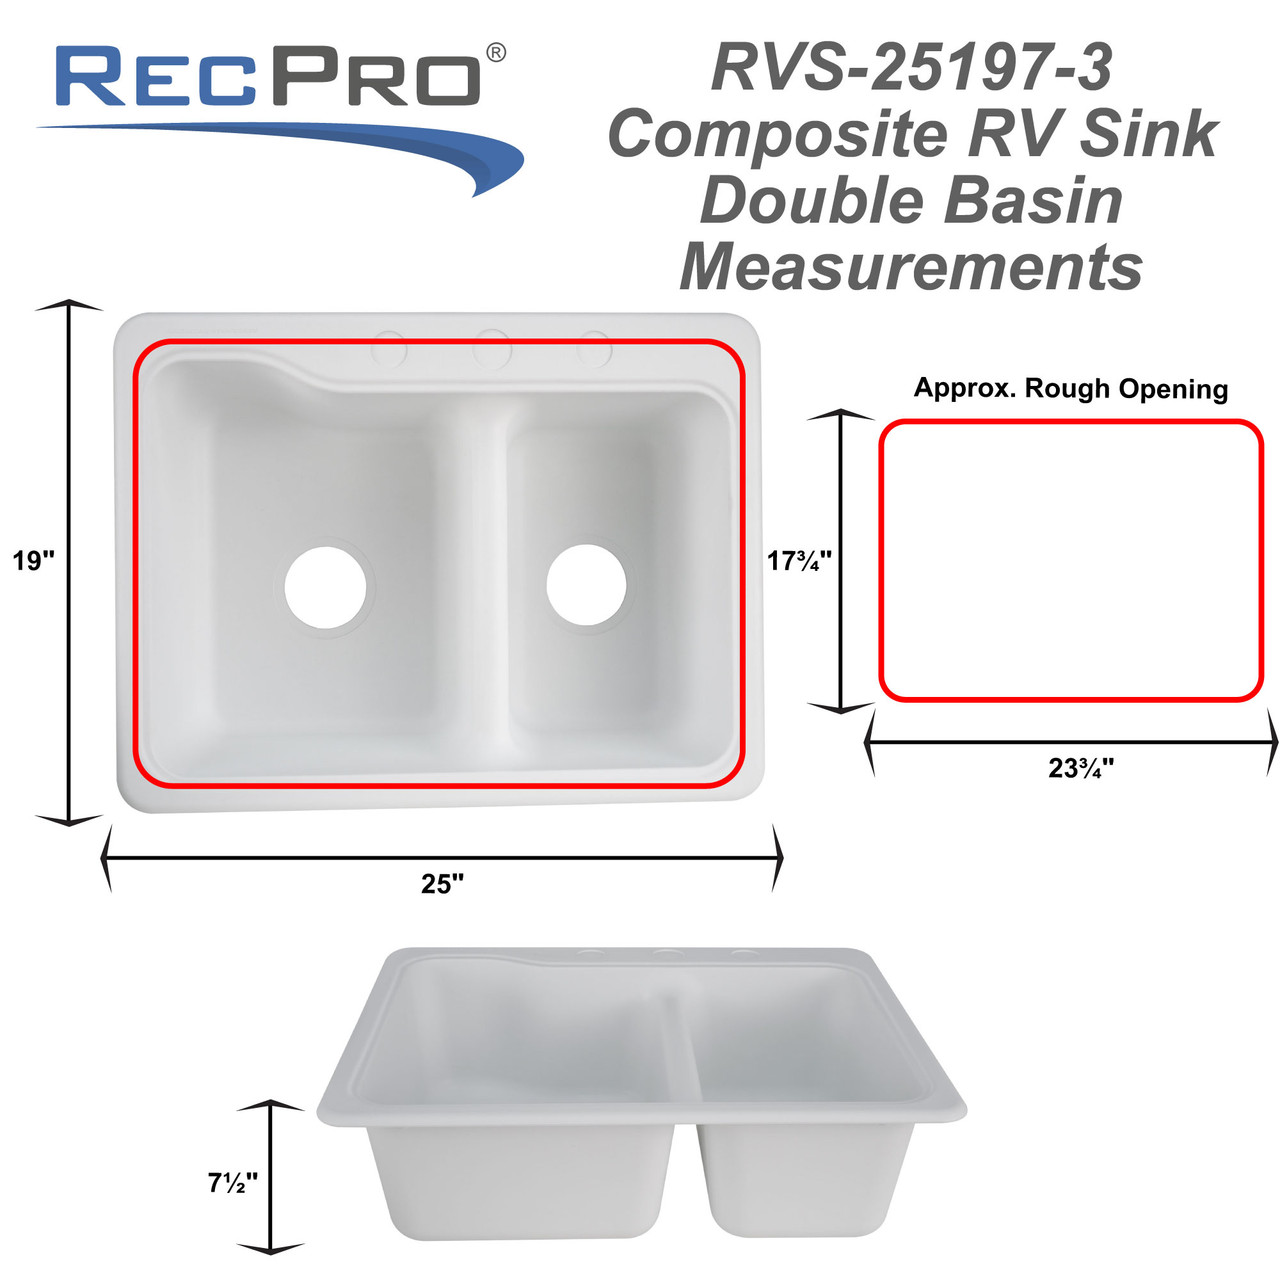 https://cdn11.bigcommerce.com/s-kwuh809851/images/stencil/1280x1280/products/879/31095/RVS-25197-3-Double-Basin-Measurements__06786.1673021195.jpg?c=2&imbypass=on